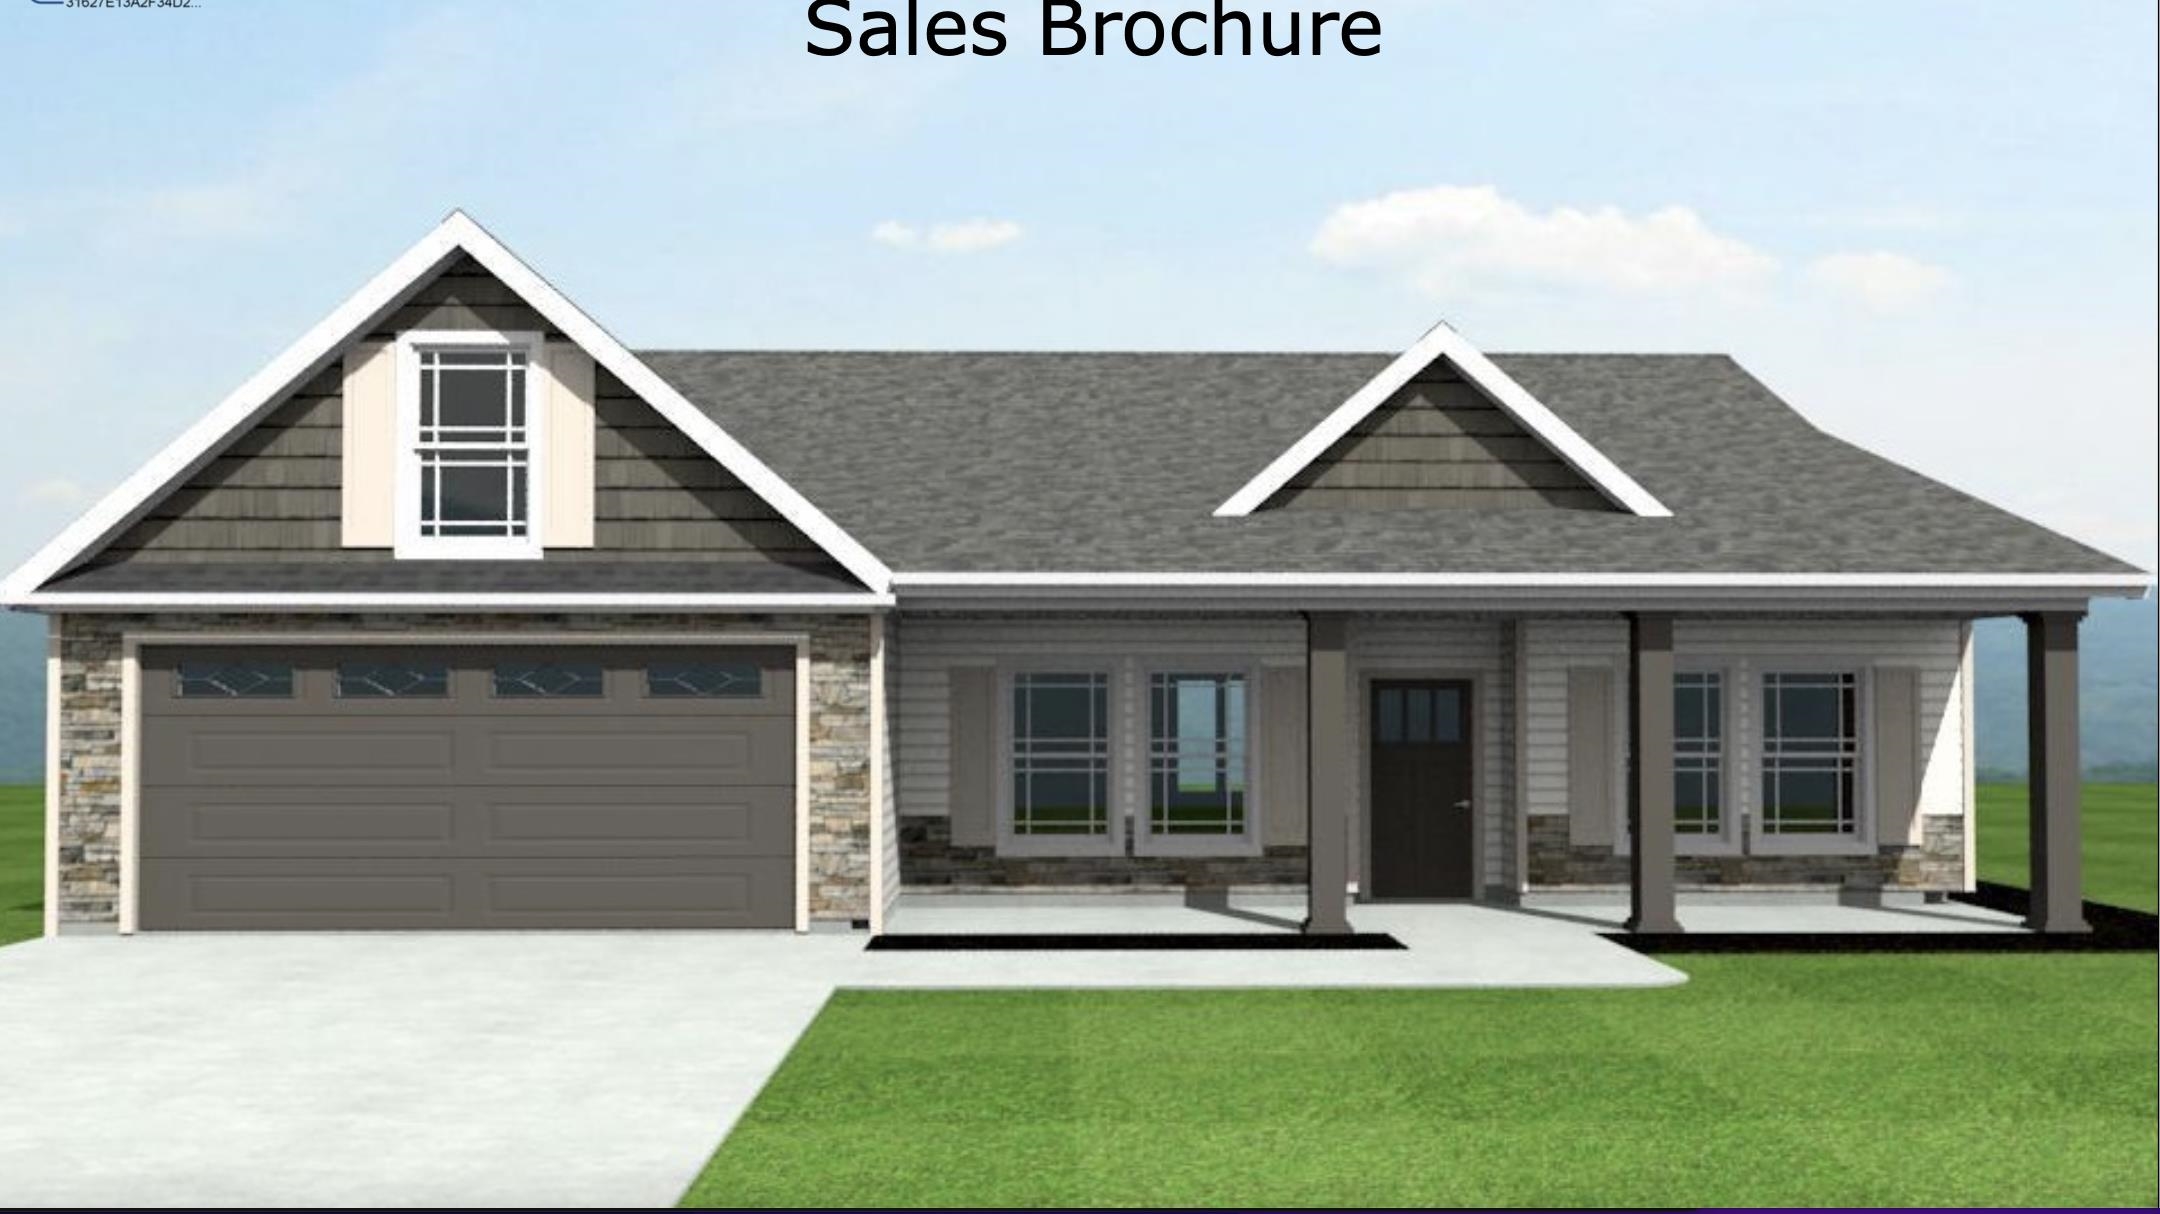 Lot 7 - The Jackson plan offers a beautiful, modern layout. Split floor plan. Kitchen open to living area.  Home complete with the trademark chair rail, crown molding, and rope lighting.  Also includes a 12x12 sunroom with 10x12 covered patio.  Lot 7